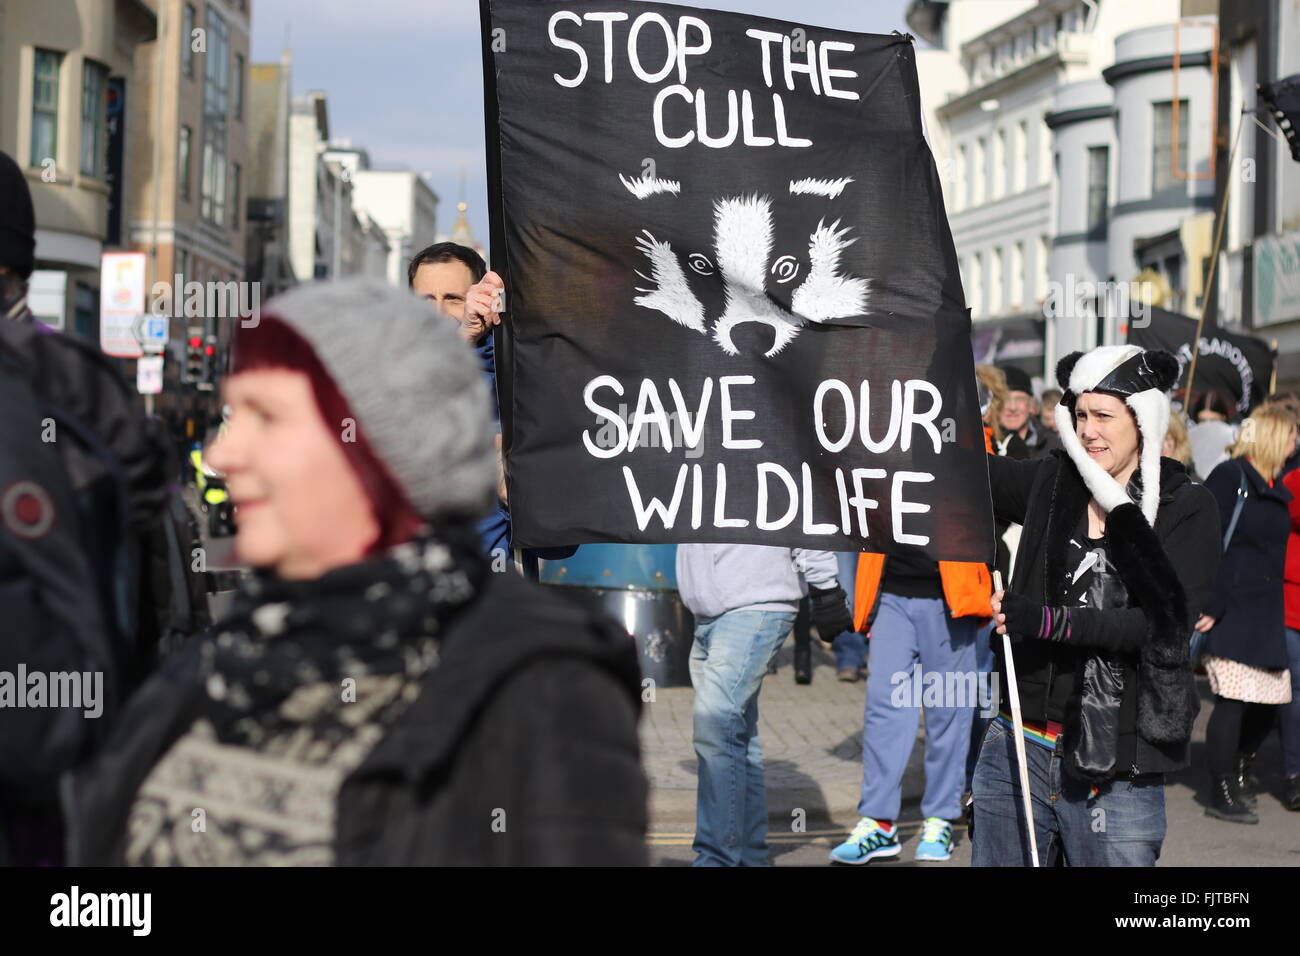 Brighton, United Kingdom. 27 February 2016. A protest against cull of badgers saw campaigners march through Brighton to the seaf Stock Photo